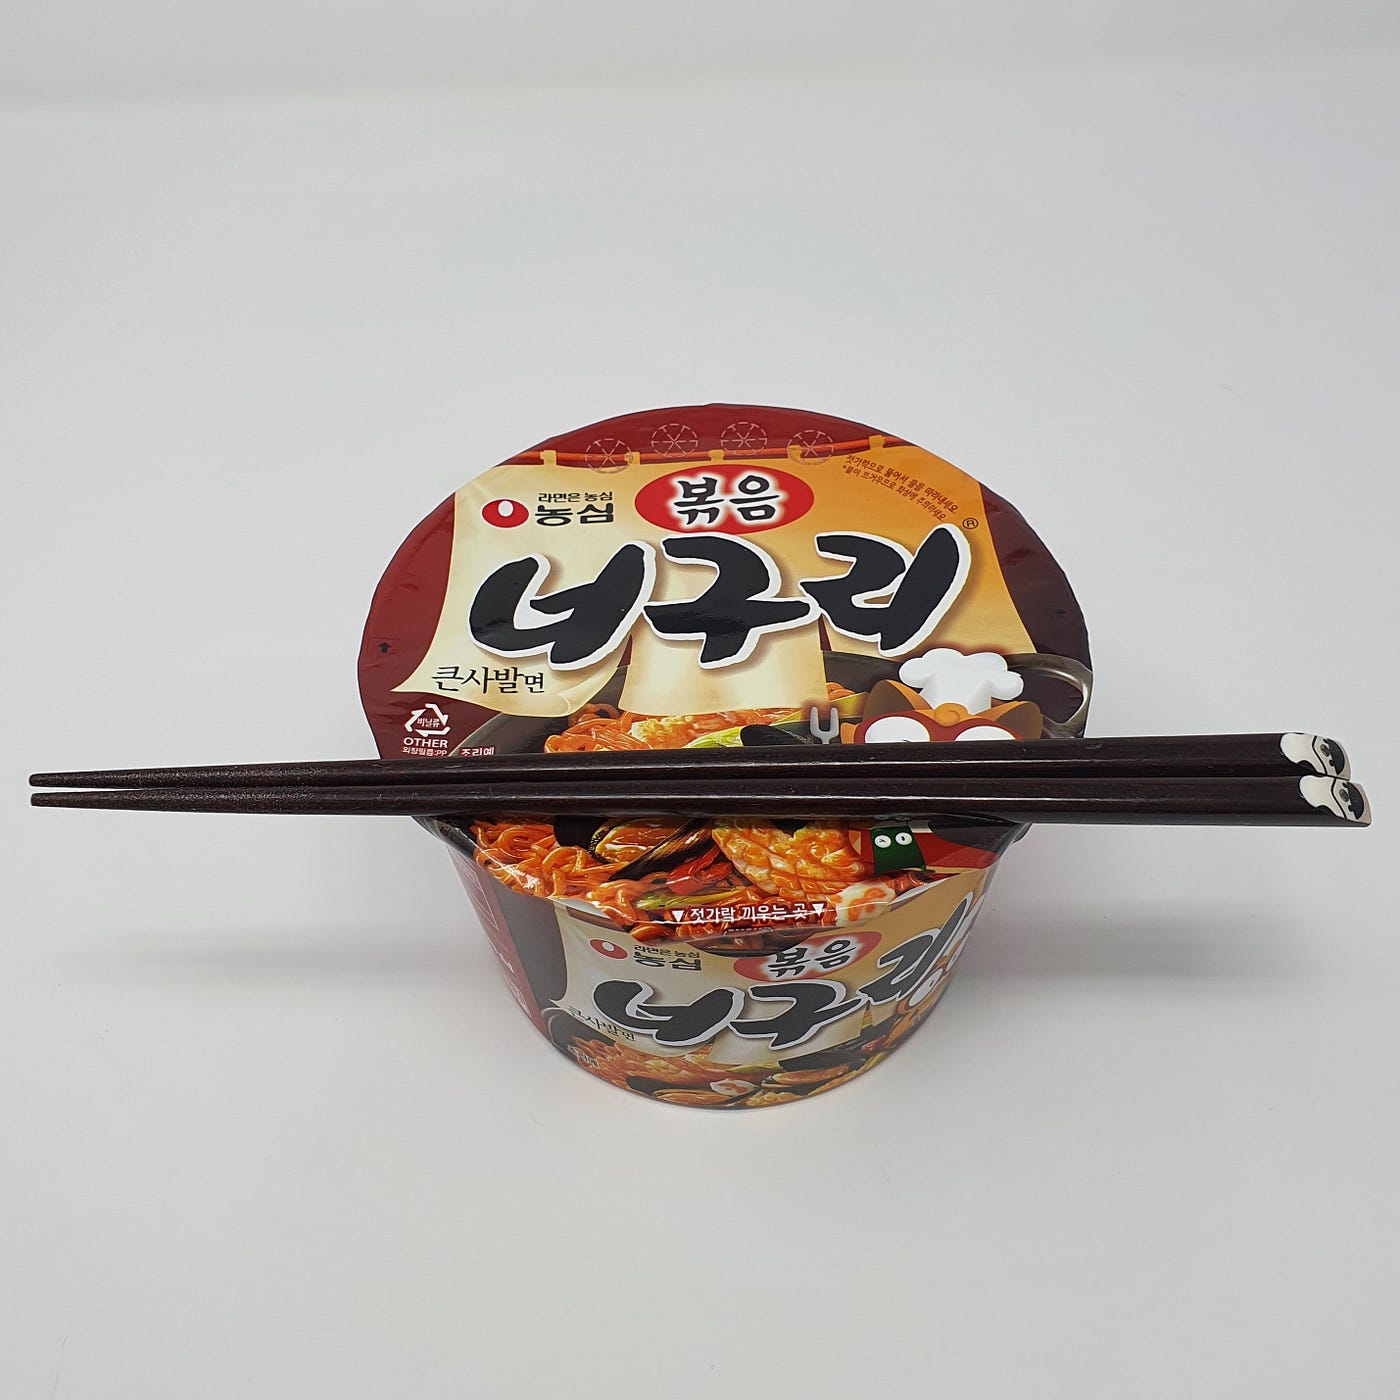 A closed cup of Nongshim Bokkeum Neoguri Instant Noodles cooking for 4 minutes with chopsticks resting on top.